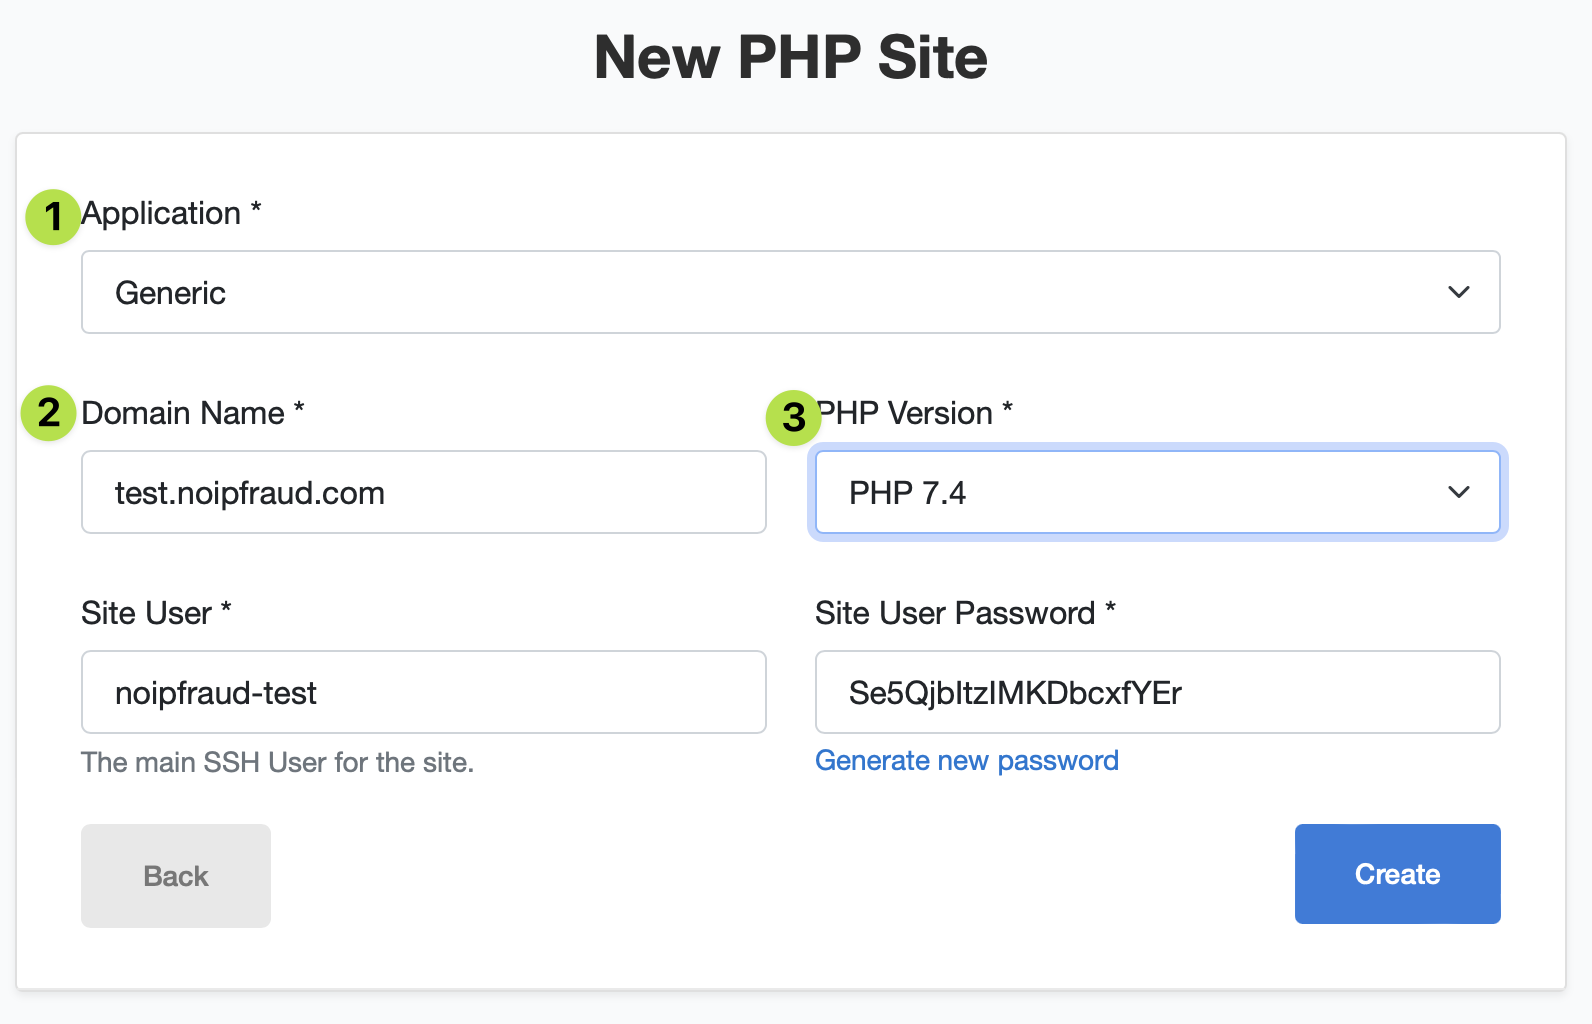 Configure the site: Generic application, php 7.4 and enter the domain name.